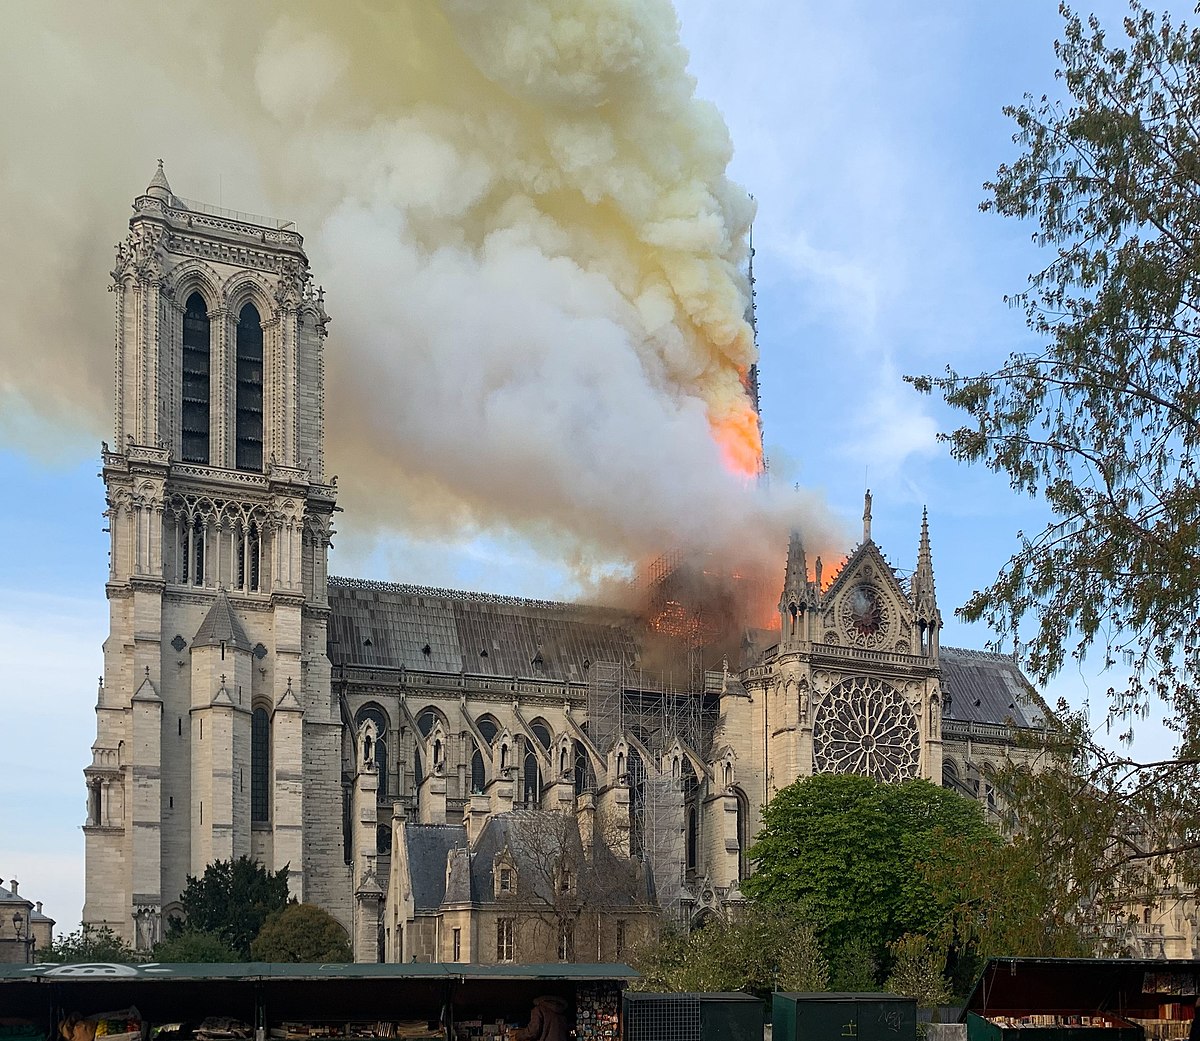 Notre Dame De Paris Fire Wikipedia consoling mickey hart after an embarrasing play there's a bunch of cameras out there right now waiting to make a joke of this, mick. notre dame de paris fire wikipedia